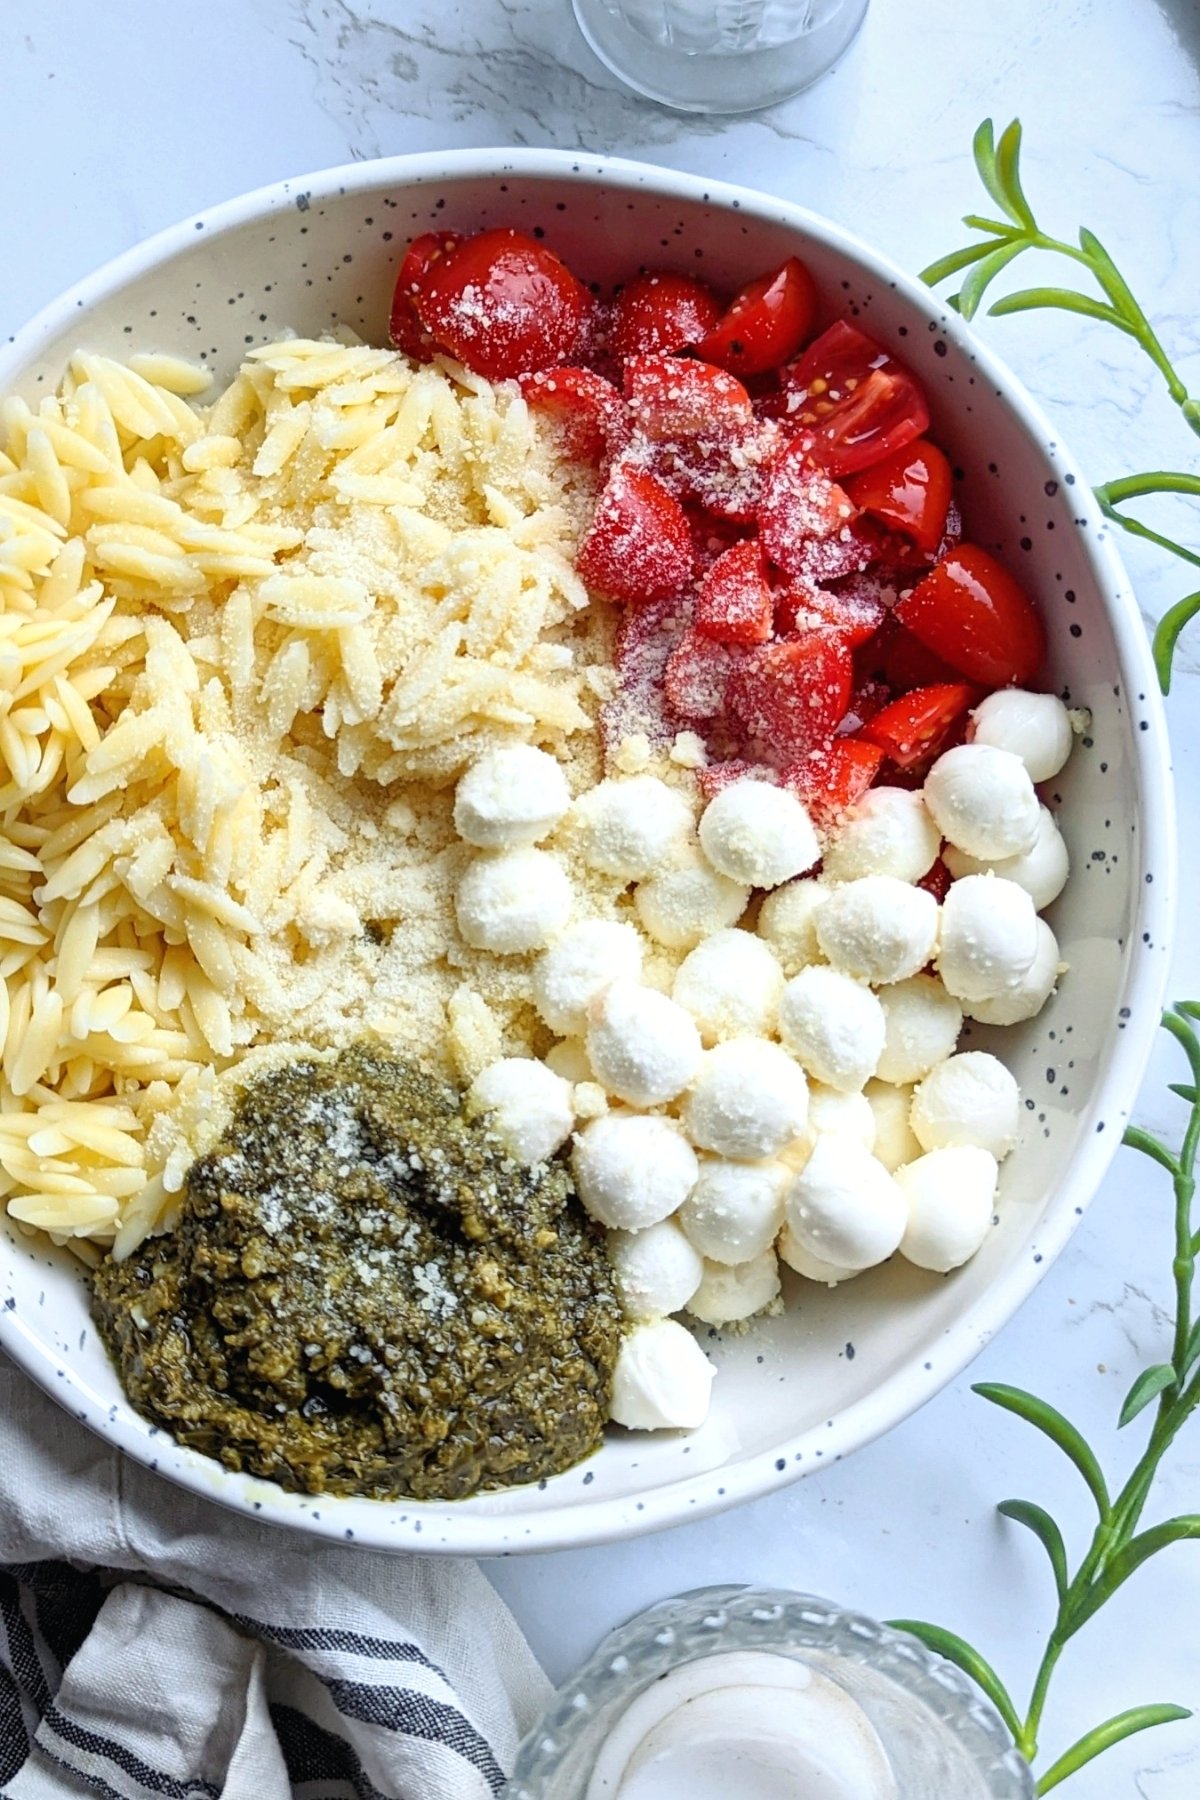 pesto orzo salad recipe vegetarian side dishes for Christmas pasta salad or thanksgiving pasta side salad recipe meatless